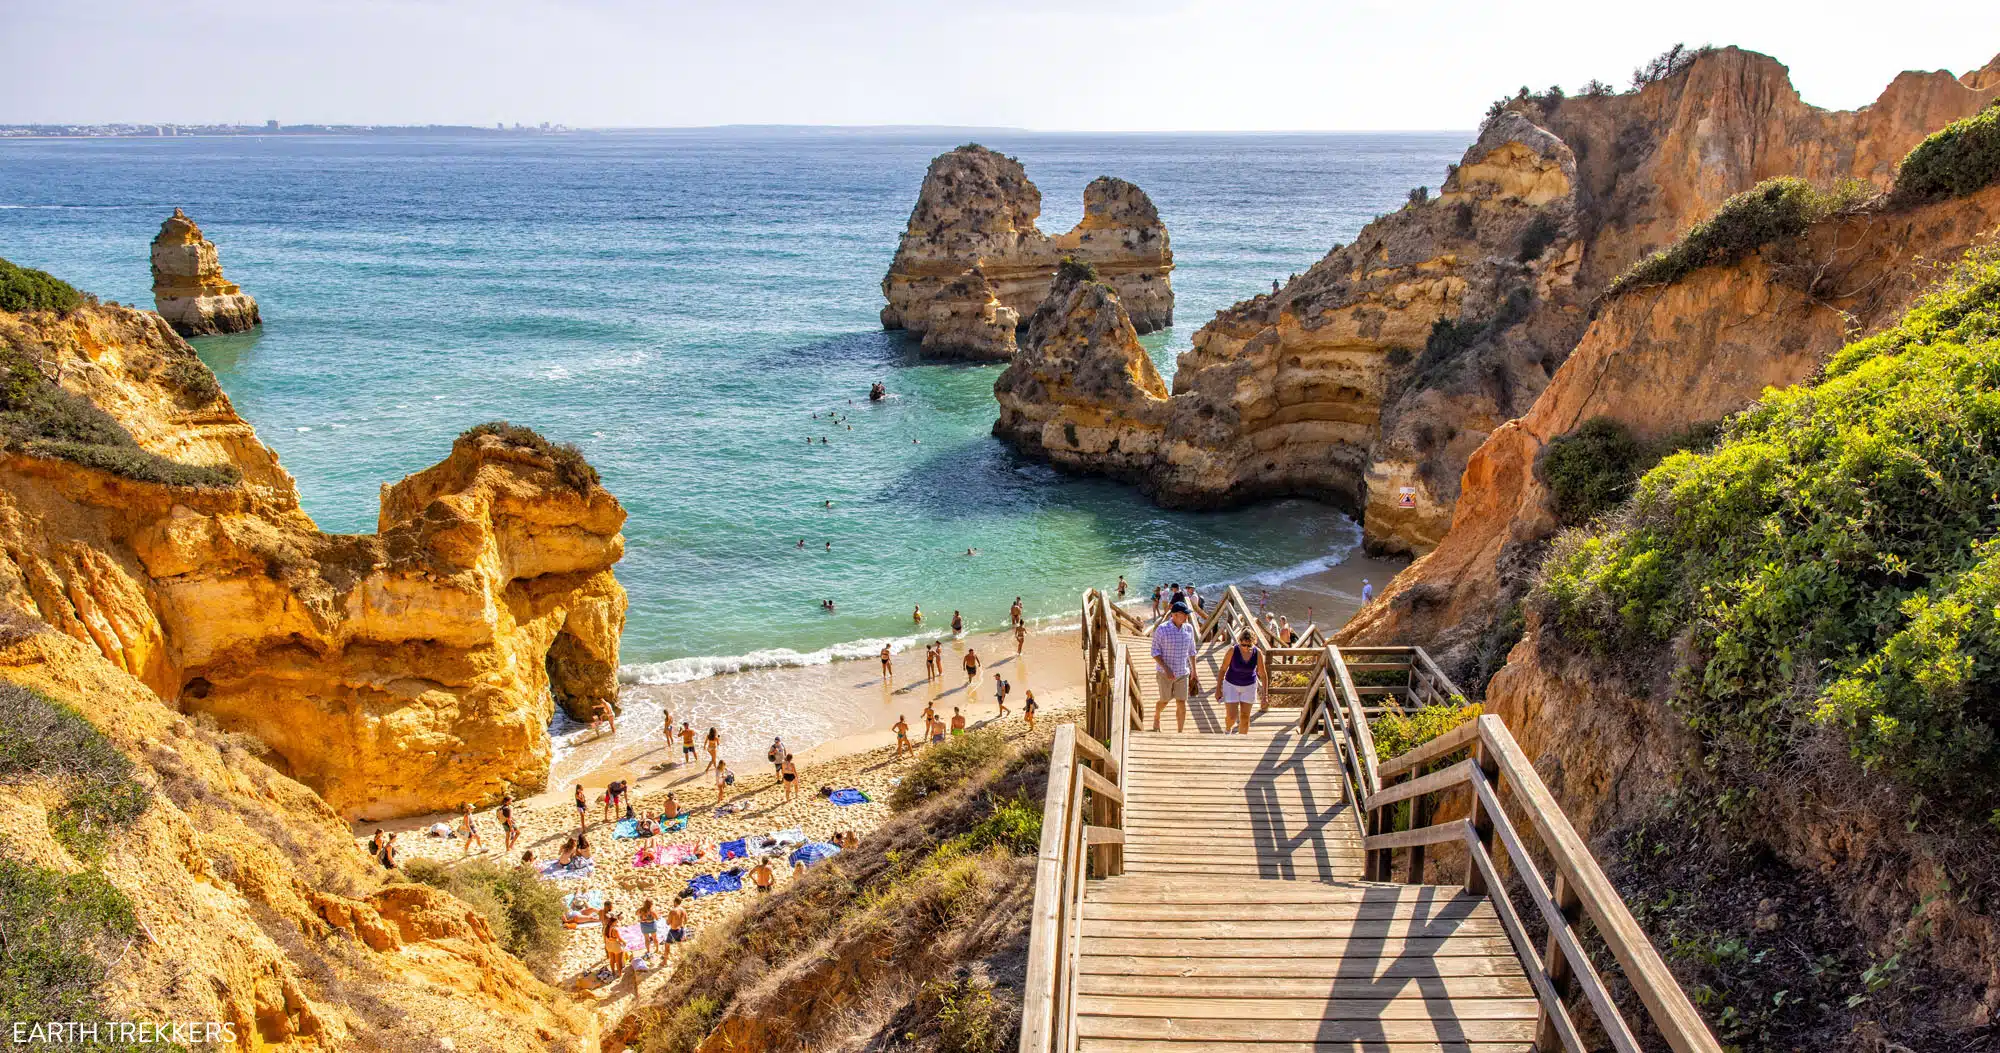 Featured image for “Best Way to Visit Ponta da Piedade: By Land & By Sea”